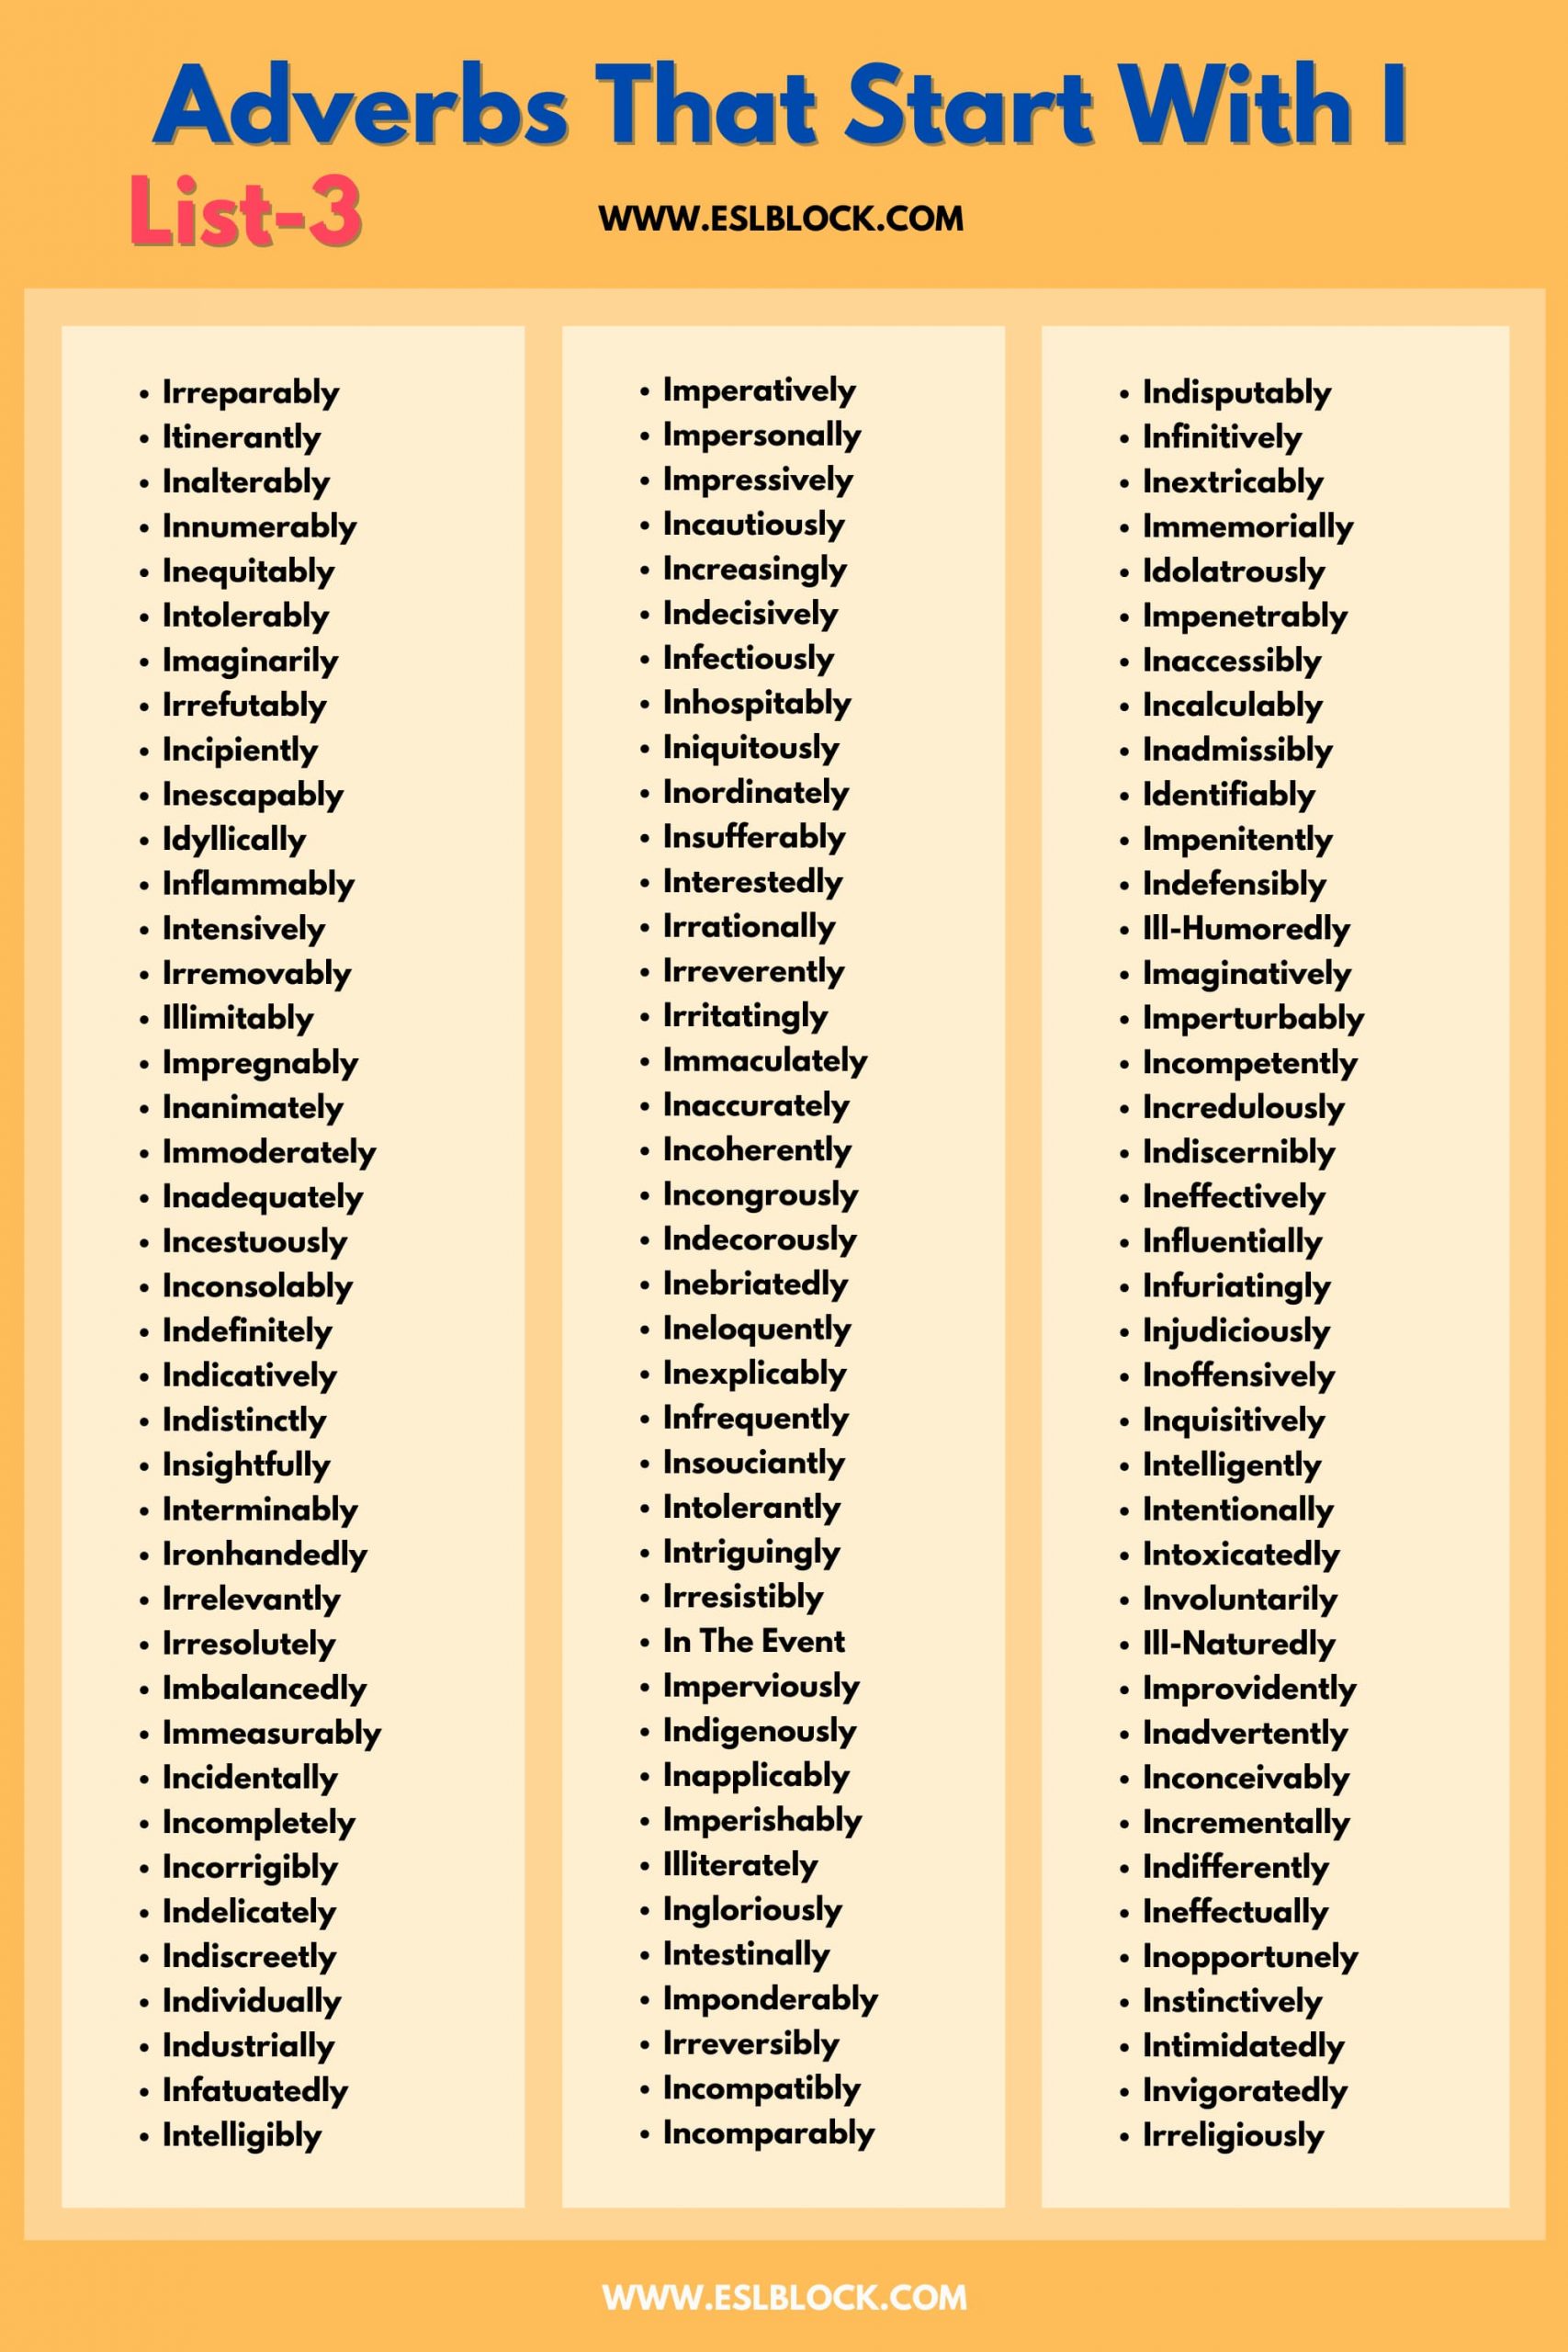 100 Example Sentences Using Adverbs, 4 Letter Adverbs That Start with I, 4 Letter Words, 5 Letter Adverbs That Start with I, 5 Letter Words, 6 Letter Adverbs That Start with I, 6 Letter Words, A to Z Adverbs, AA Adverbs, Adverb vocabulary words, Adverbs, Adverbs That Start with I, Adverbs with Example Sentences, All Adverbs, Types of Adverbs, Types of Adverbs with Example Sentences, Vocabulary, What are Adverbs, What are the types of Adverbs, Words That with I